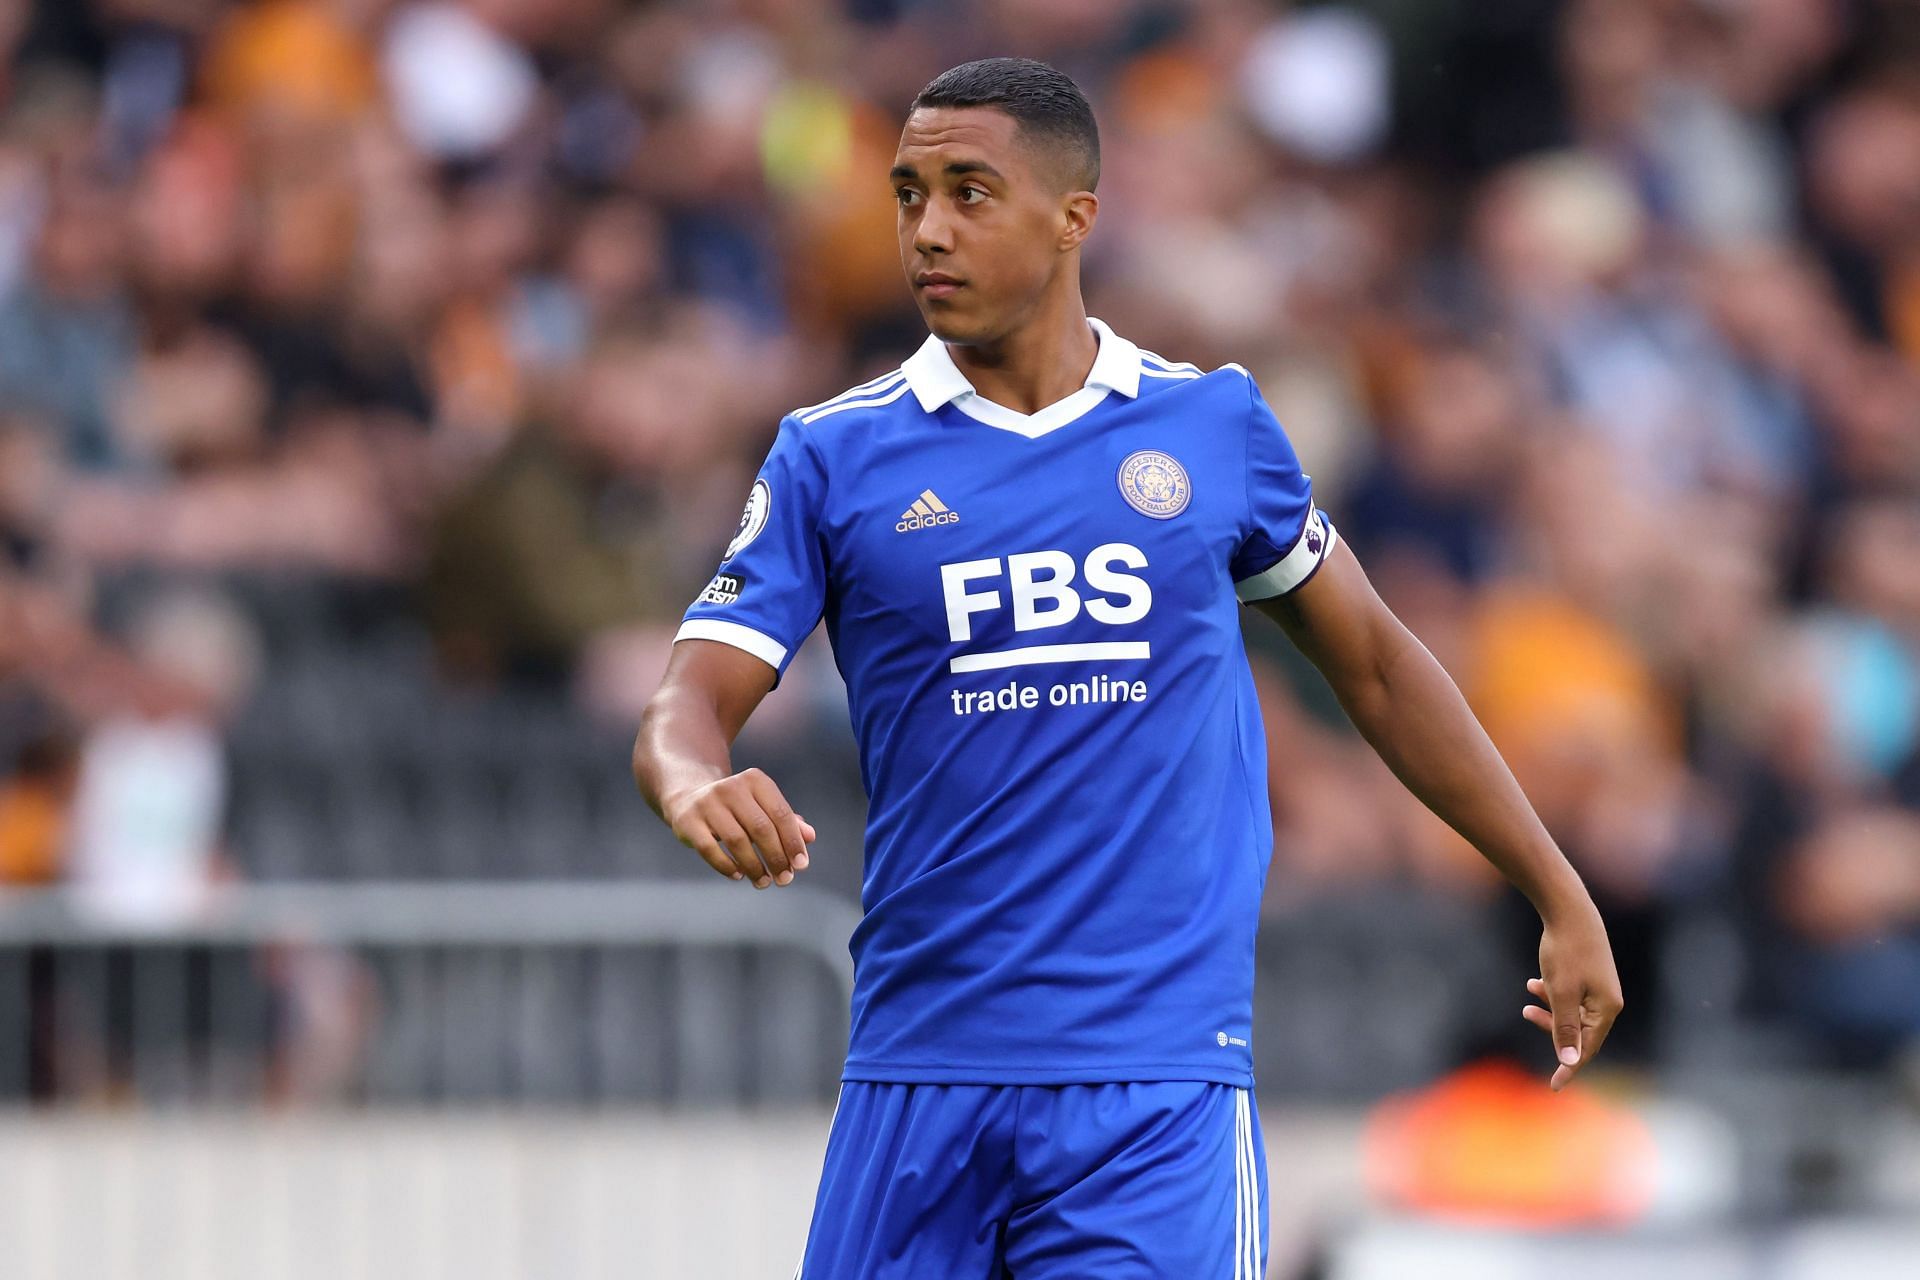 Youri Tielemans is a long-term target of the Gunners.